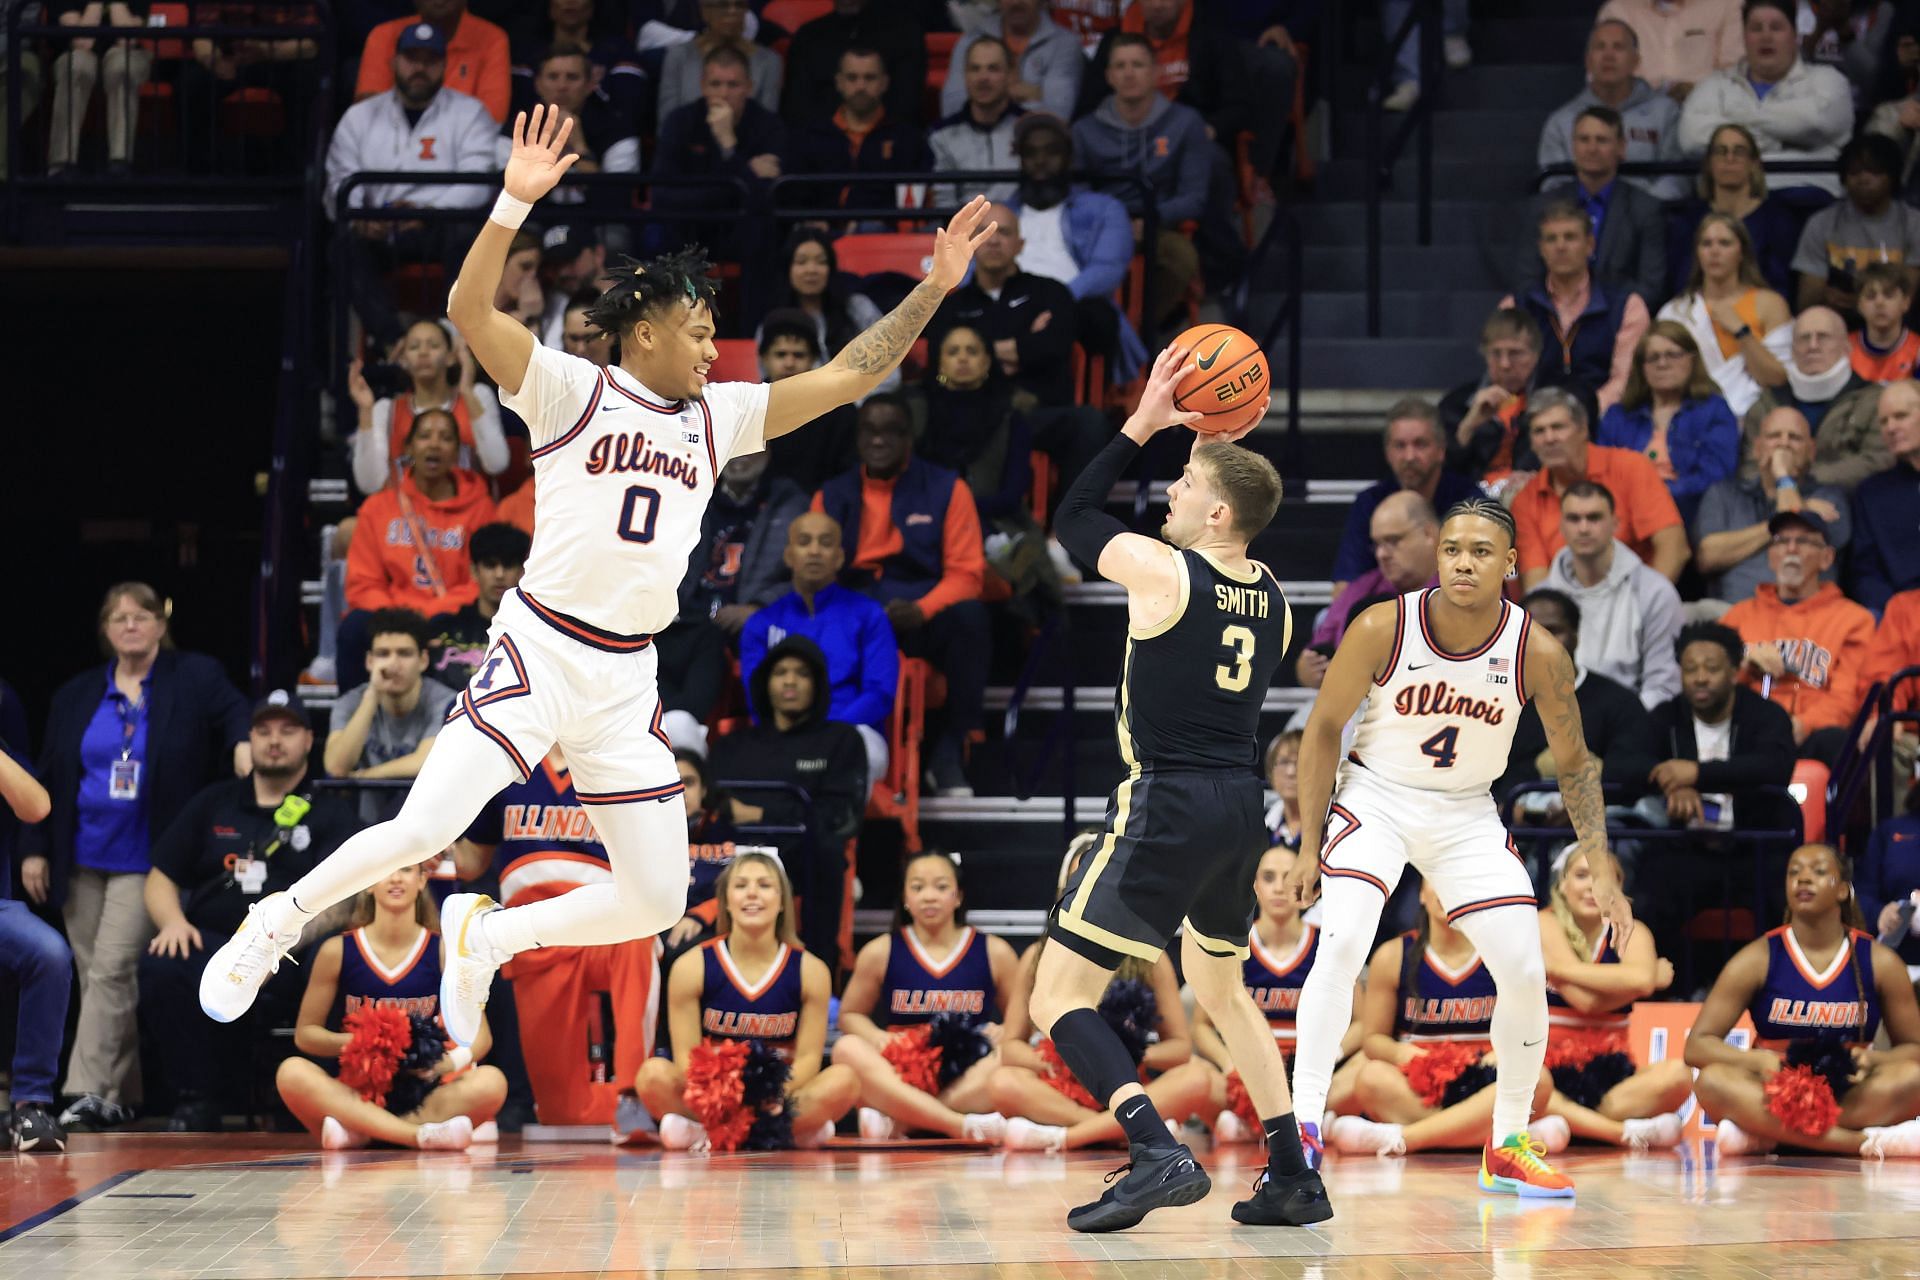 Illinois is solidly the second-best team in the Big Ten and will likely earn a No. 4 seed in the NCAA Tournament.